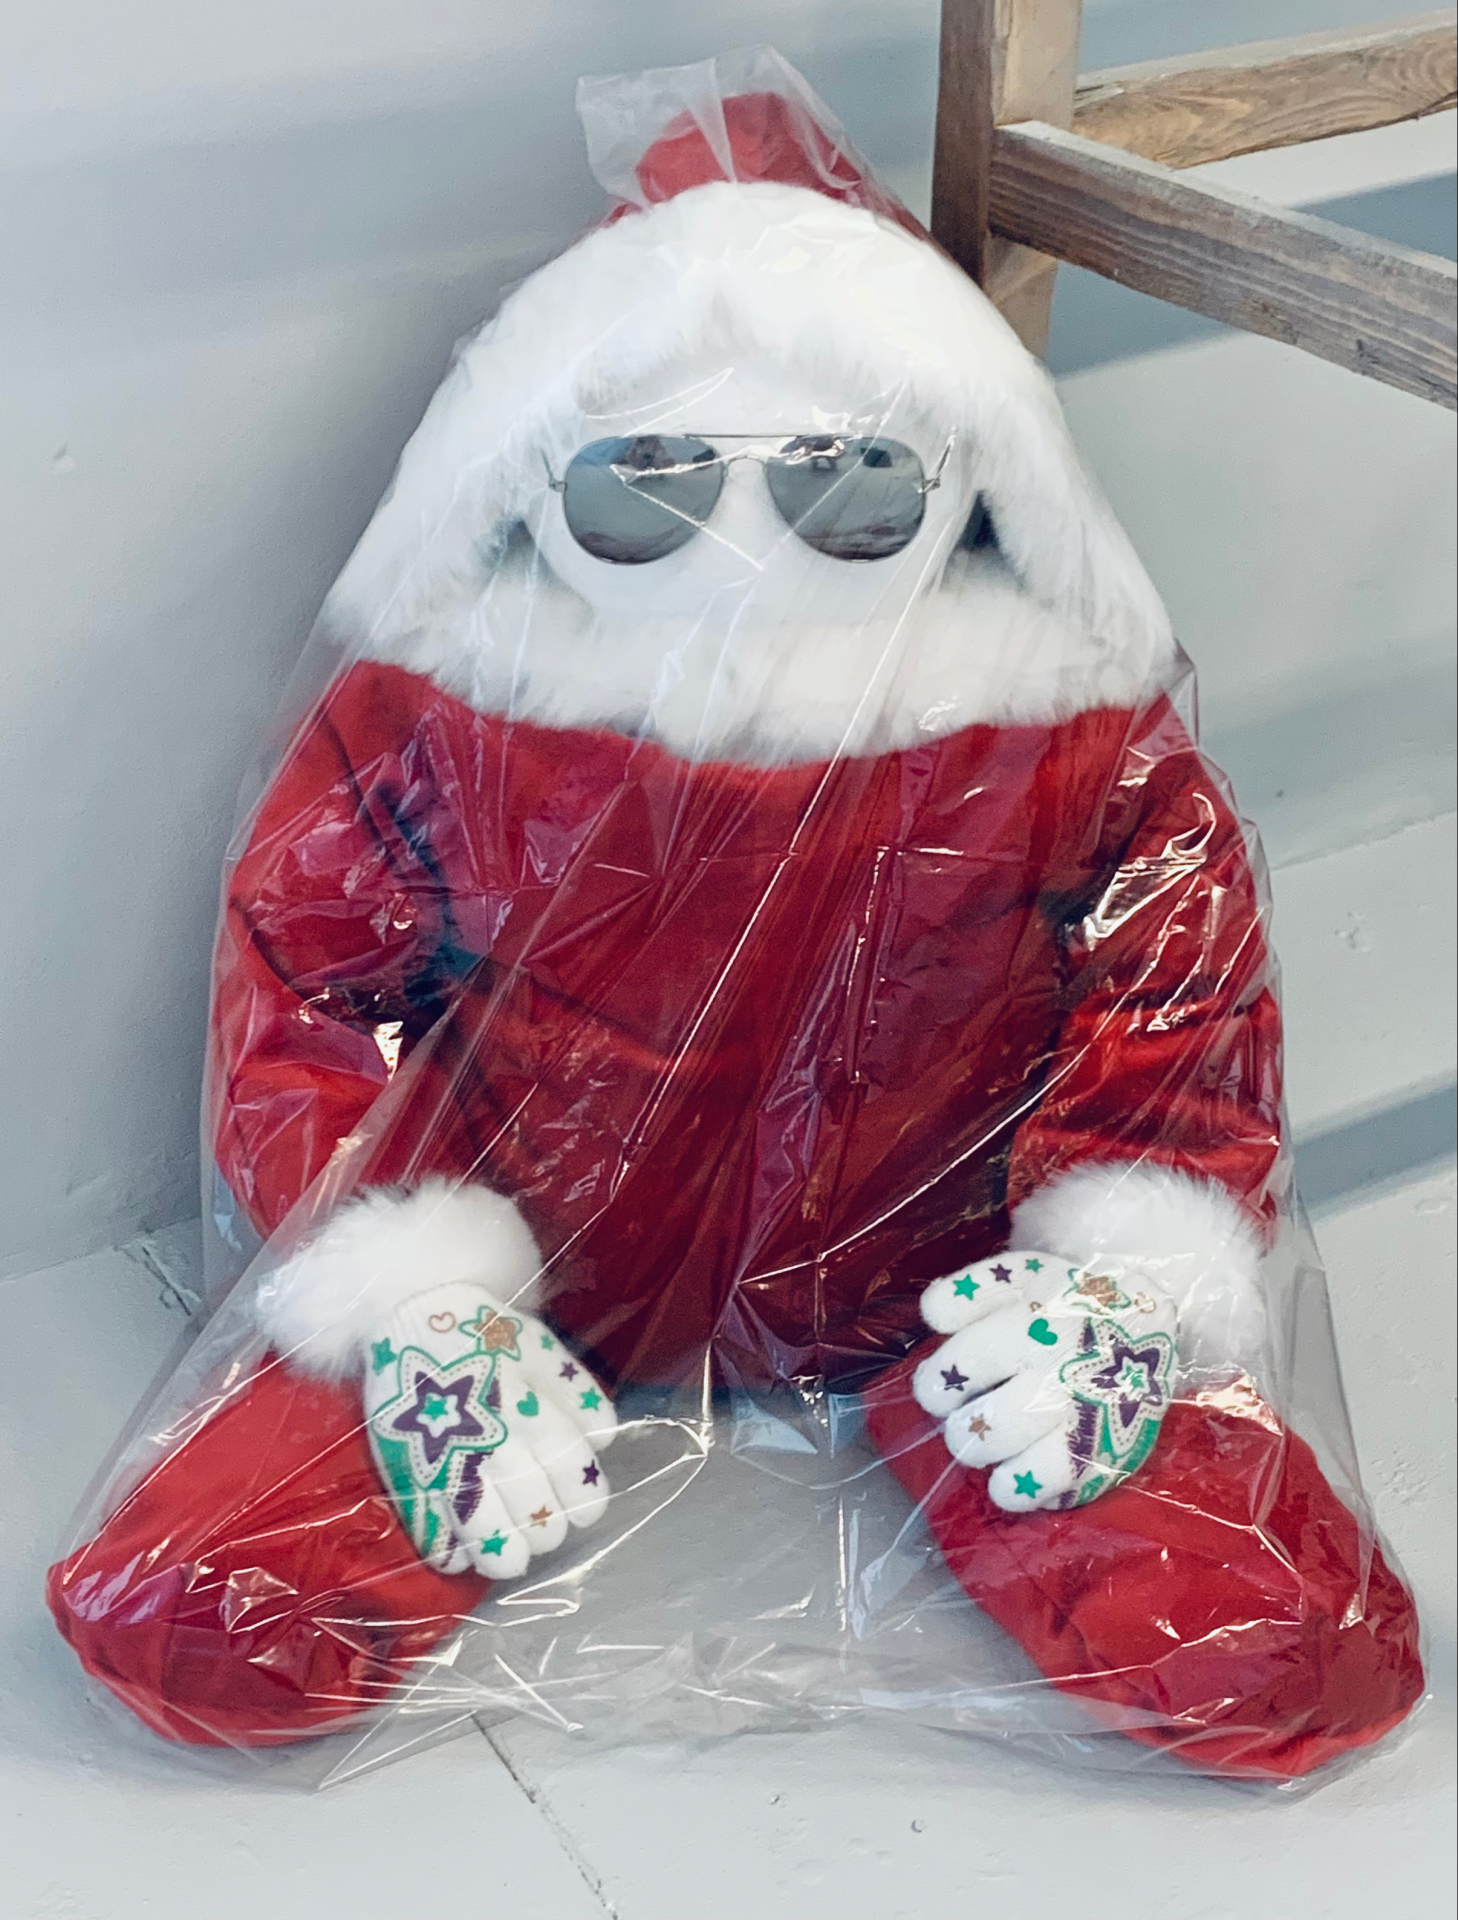 A photo of a small santa doll in silver aviators and wrapped in a clear dust sheet.